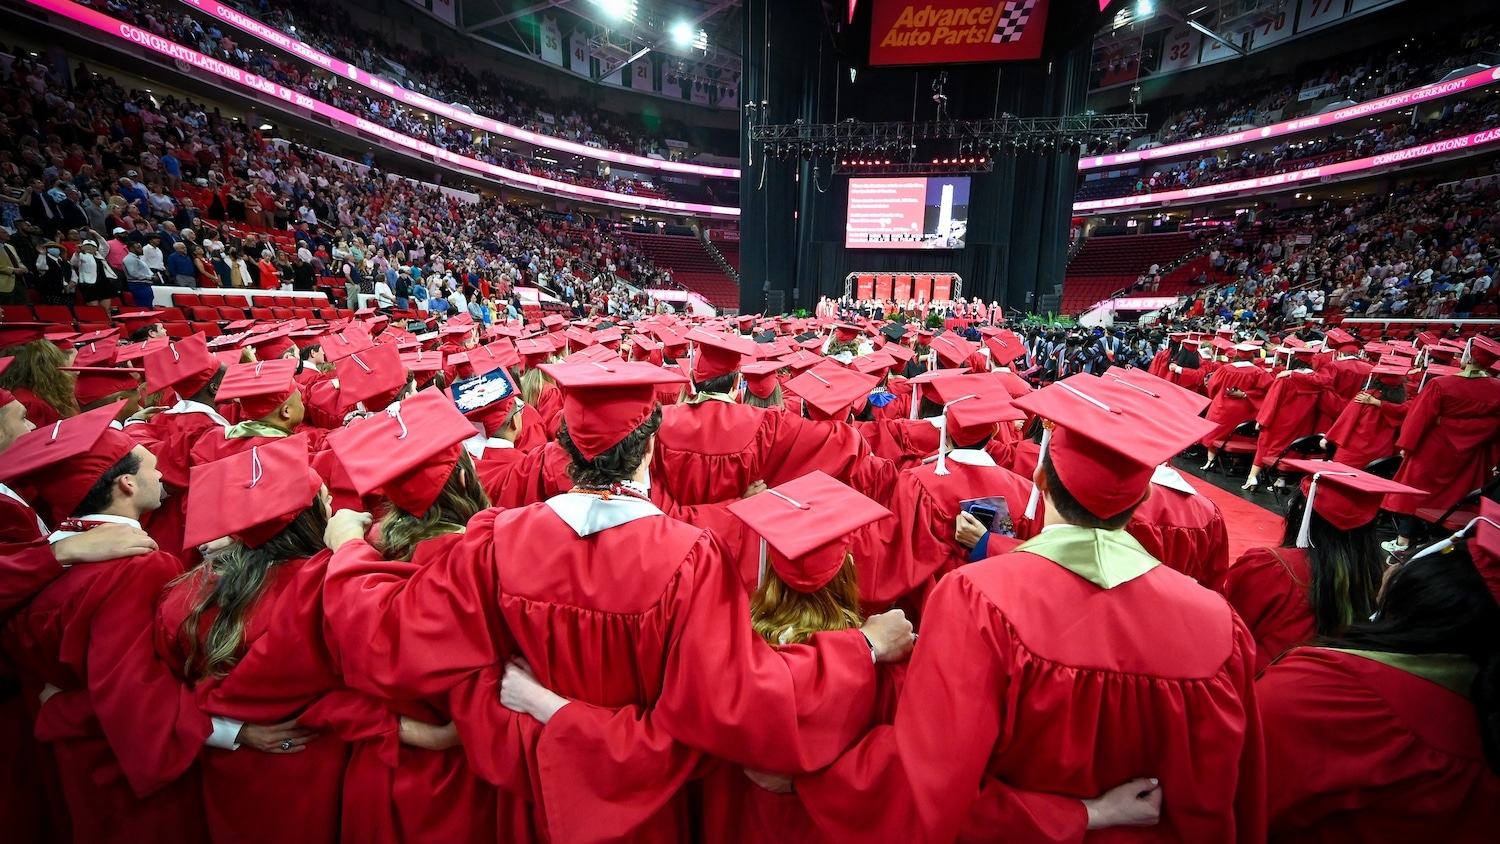 Graduates stand together and embrace each other during the commencement ceremony at PNC Arena.